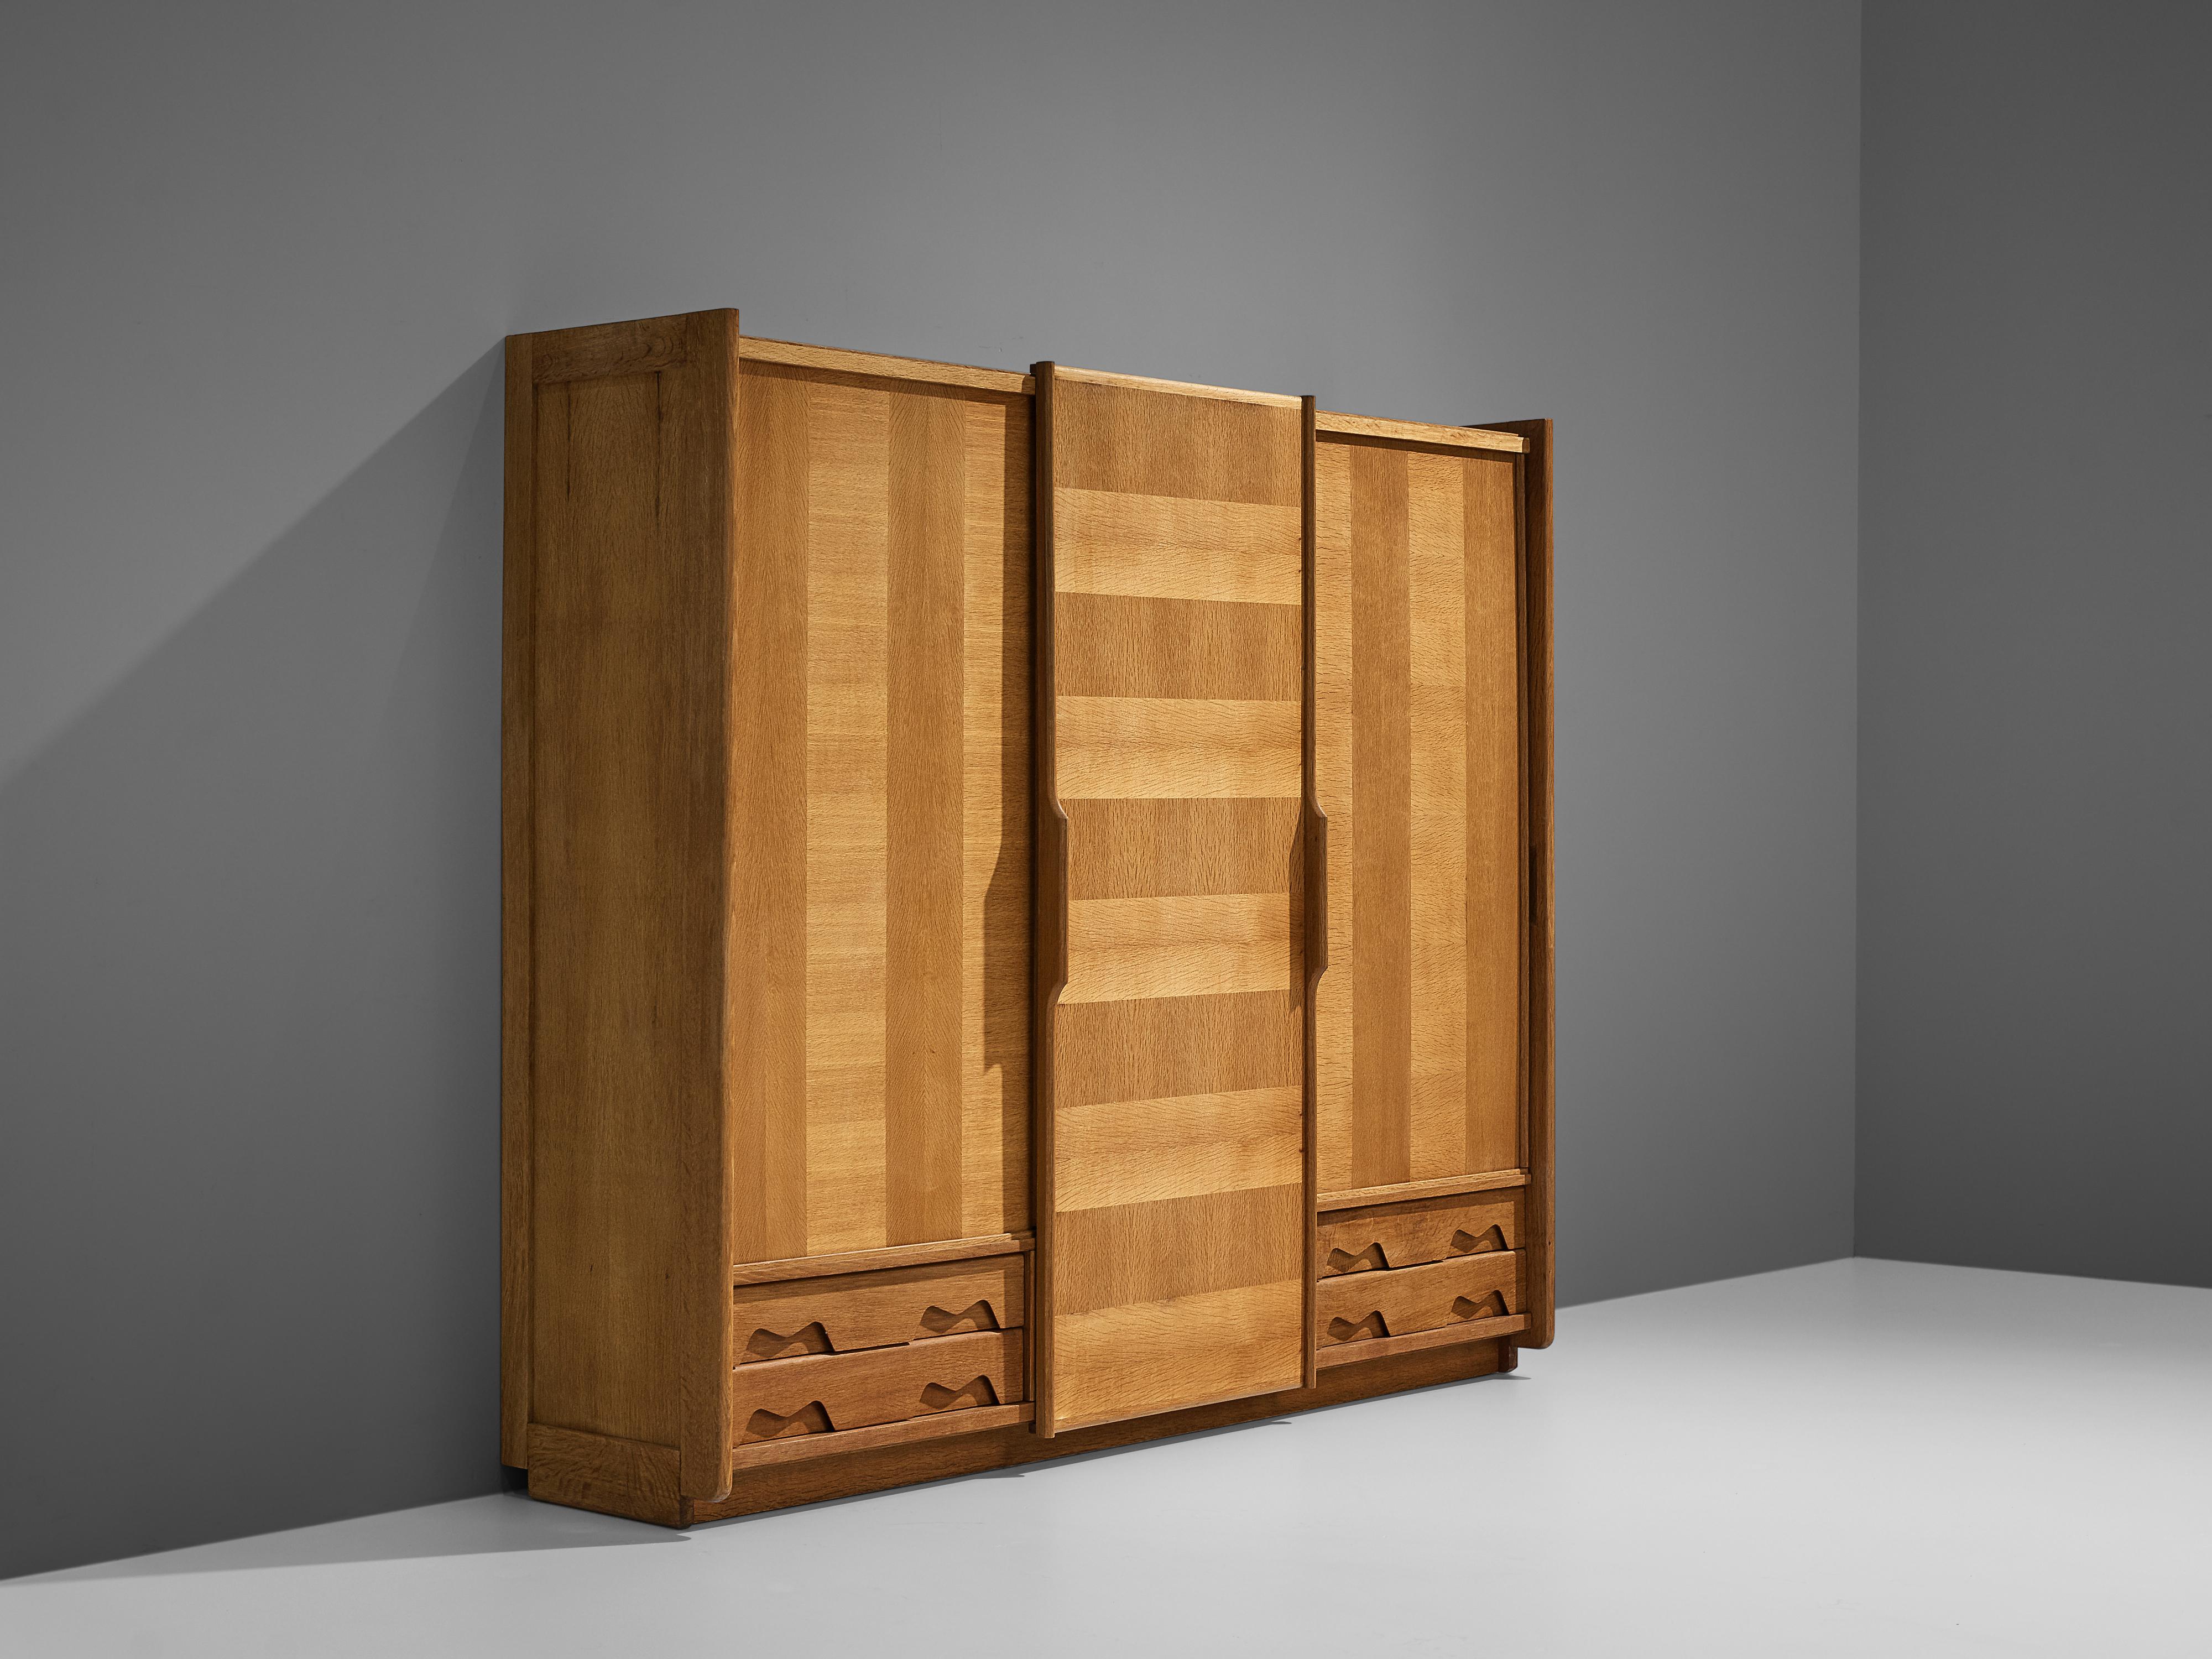 Guillerme et Chambron for Votre Maison, wardrobe, oak, France, 1960s.

Three sliding doors structure this armoire designed by Guillerme et Chambron. Two doors are expanded with two bottom drawers which show decorative forms. The doors are visually